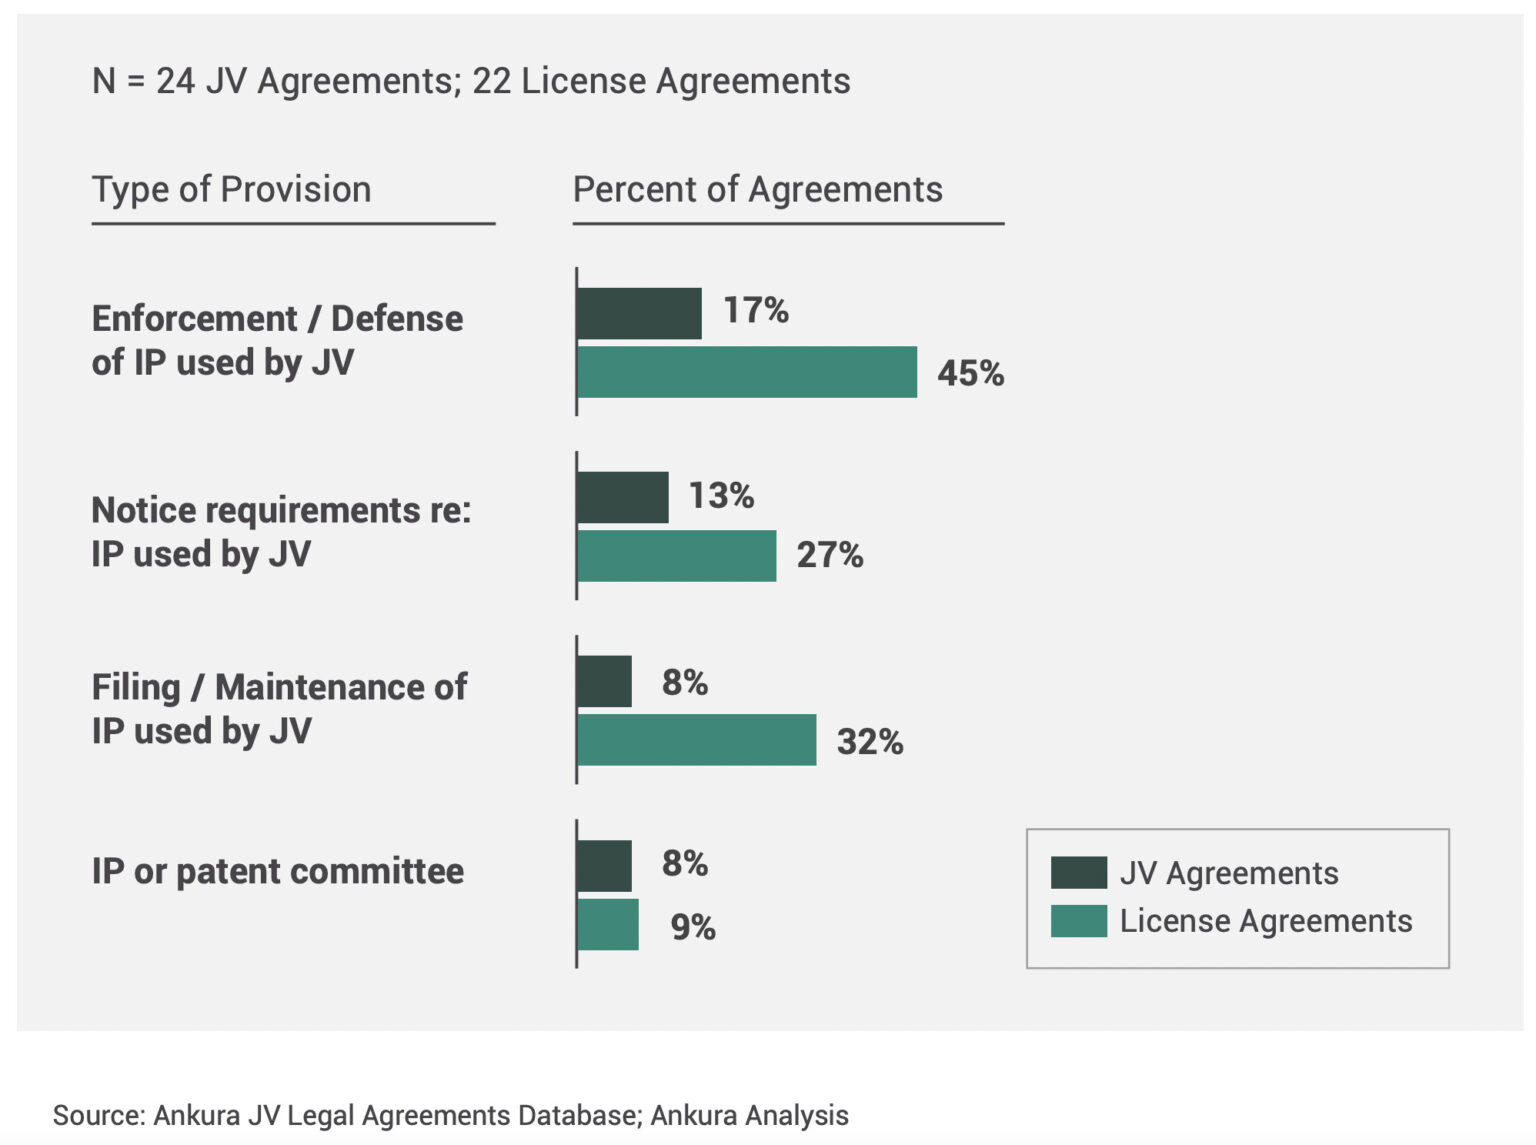 Joint Venture infographic describing provisions and types of agreements